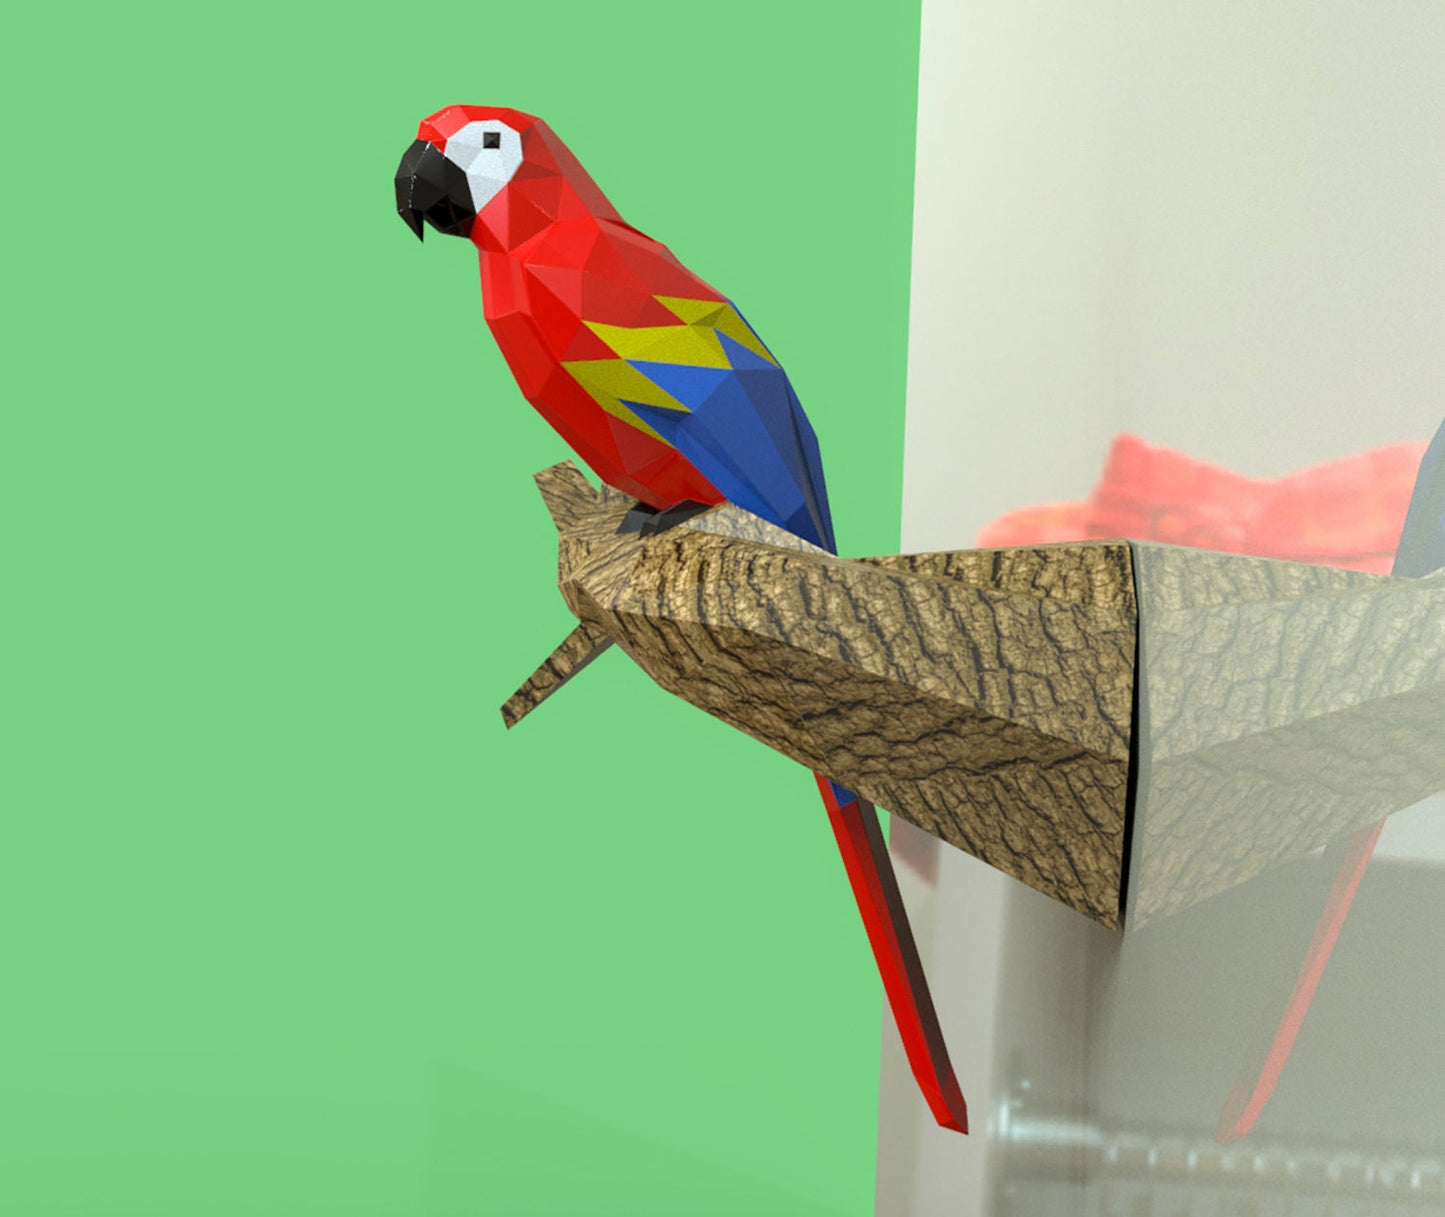 Parrot Macaw